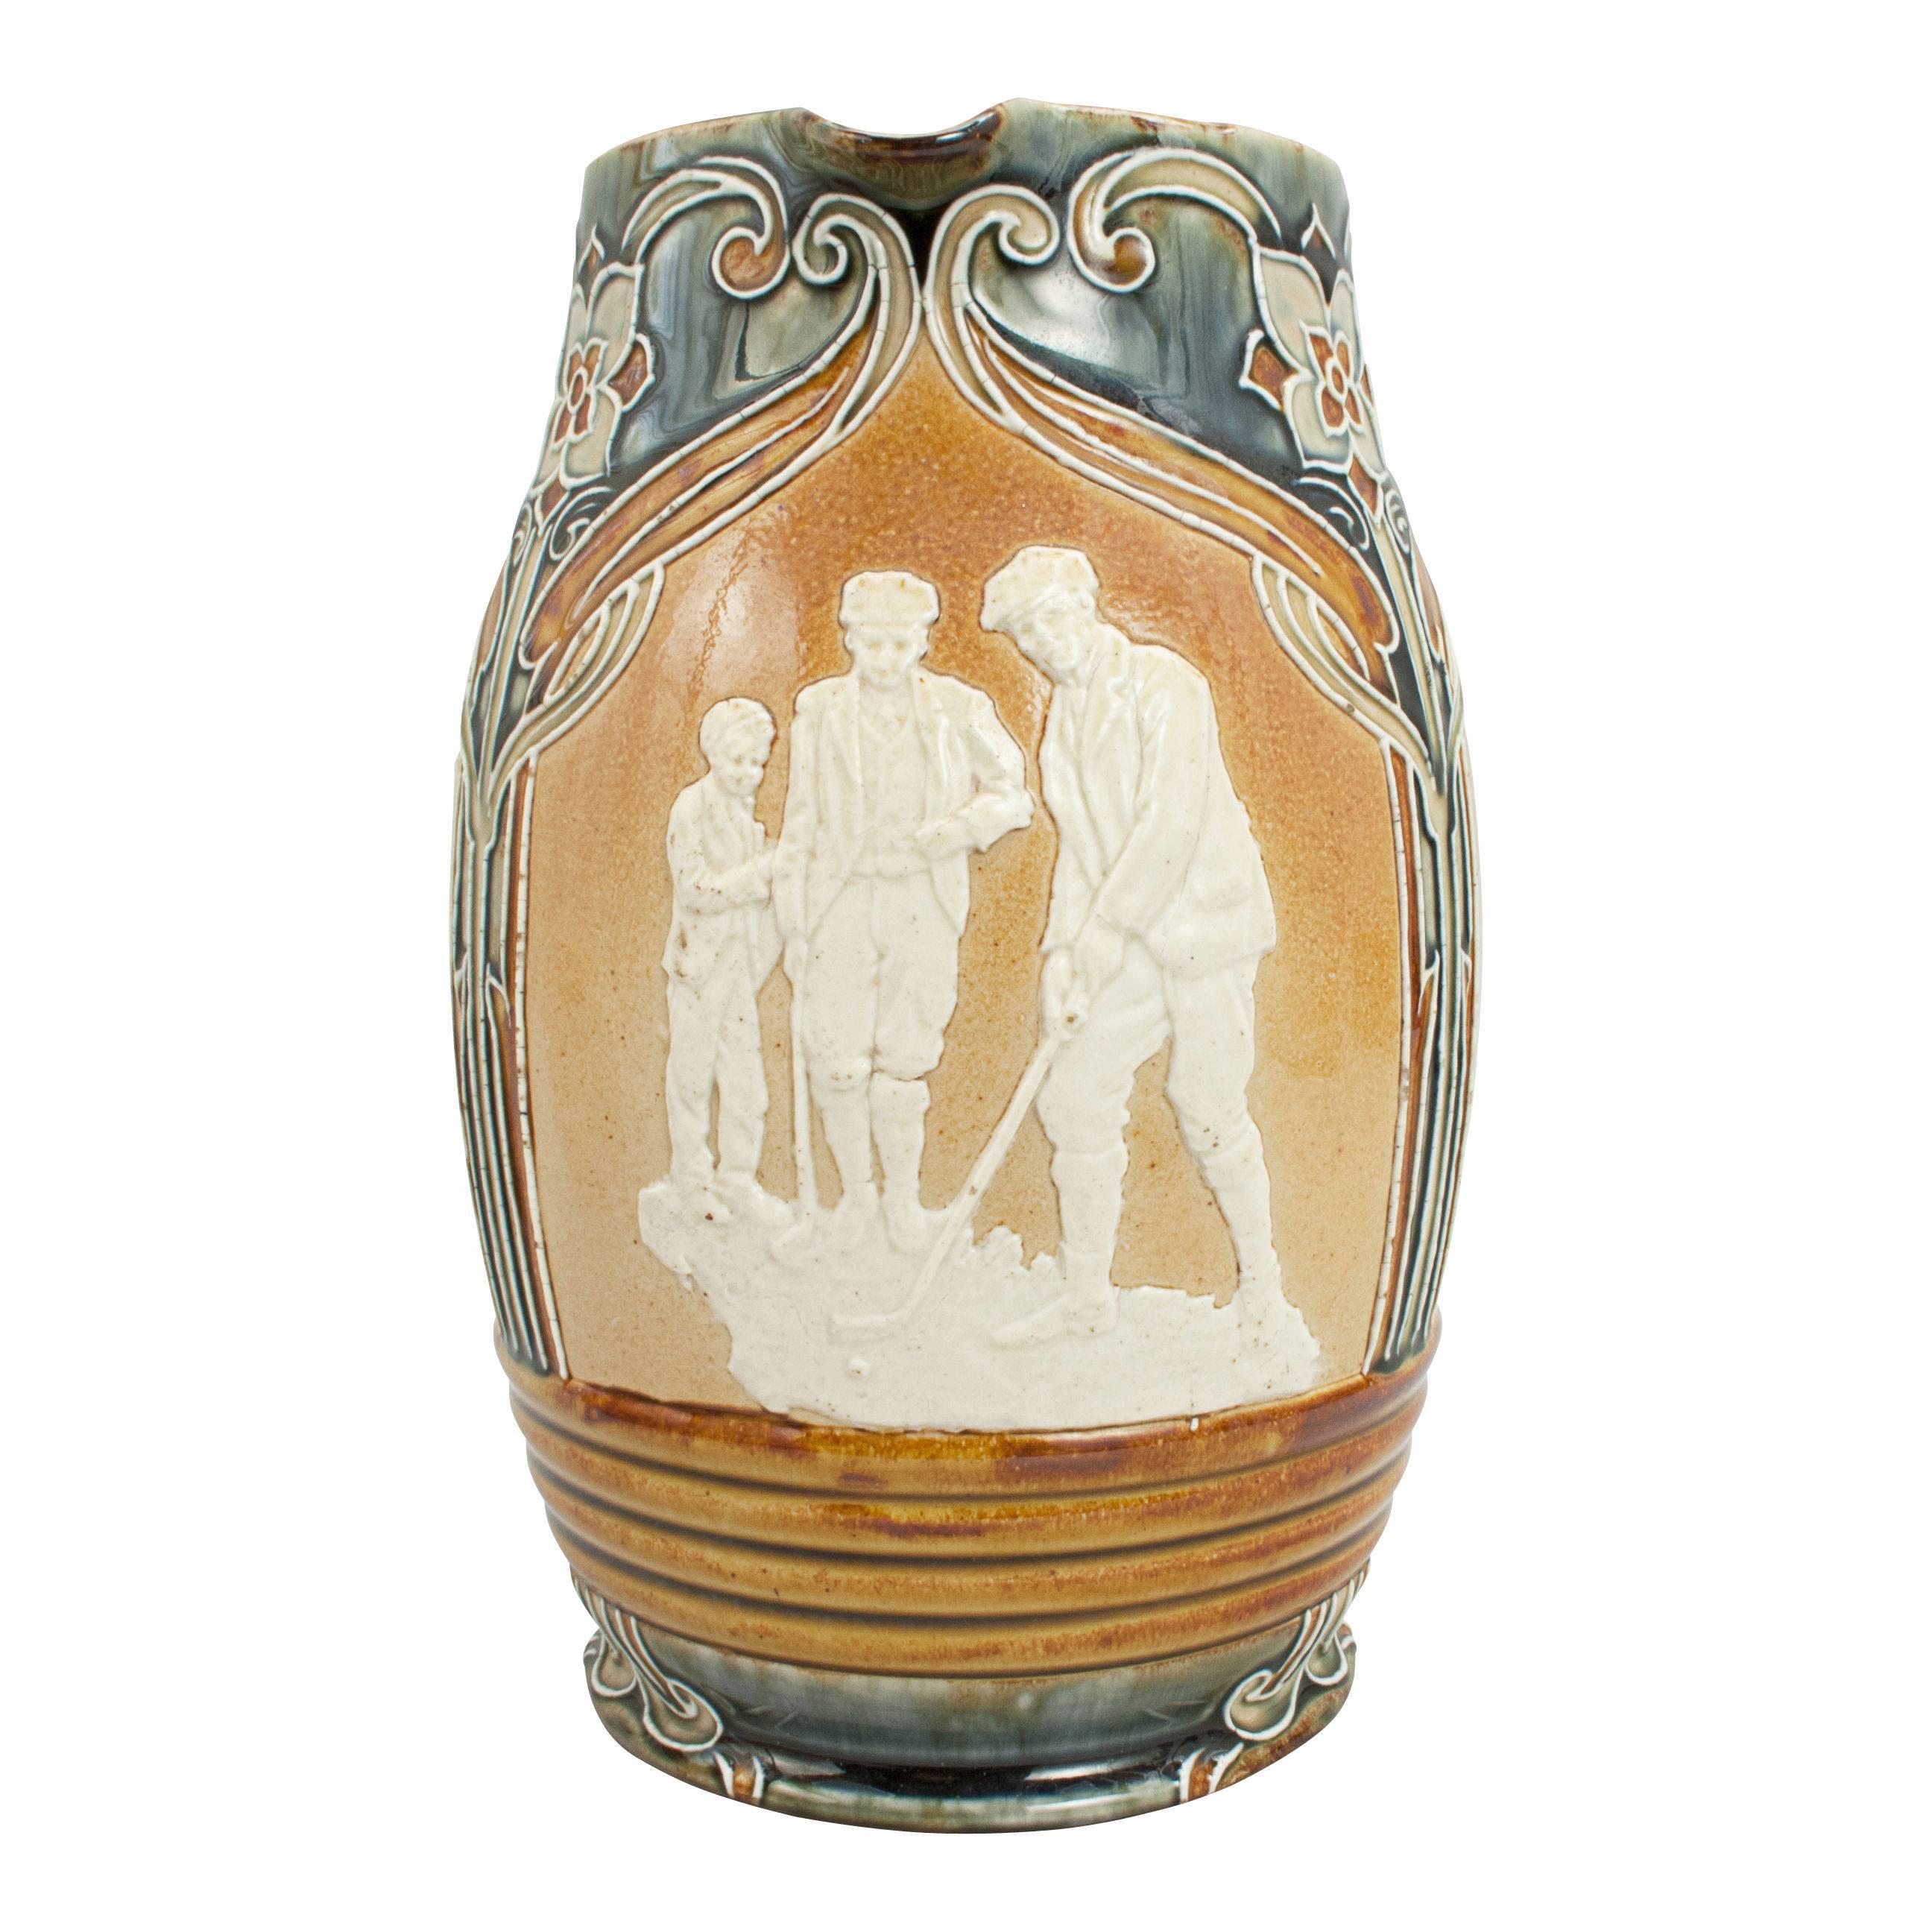 A Royal Doulton Lambeth stoneware jug with Art Nouveau design and golfing scenes in white relief. The designs are based on models by John Broad and are 'Lost Ball, Putting and The Drive'. The base of the jug is stamped 'Doulton Lambeth England' the